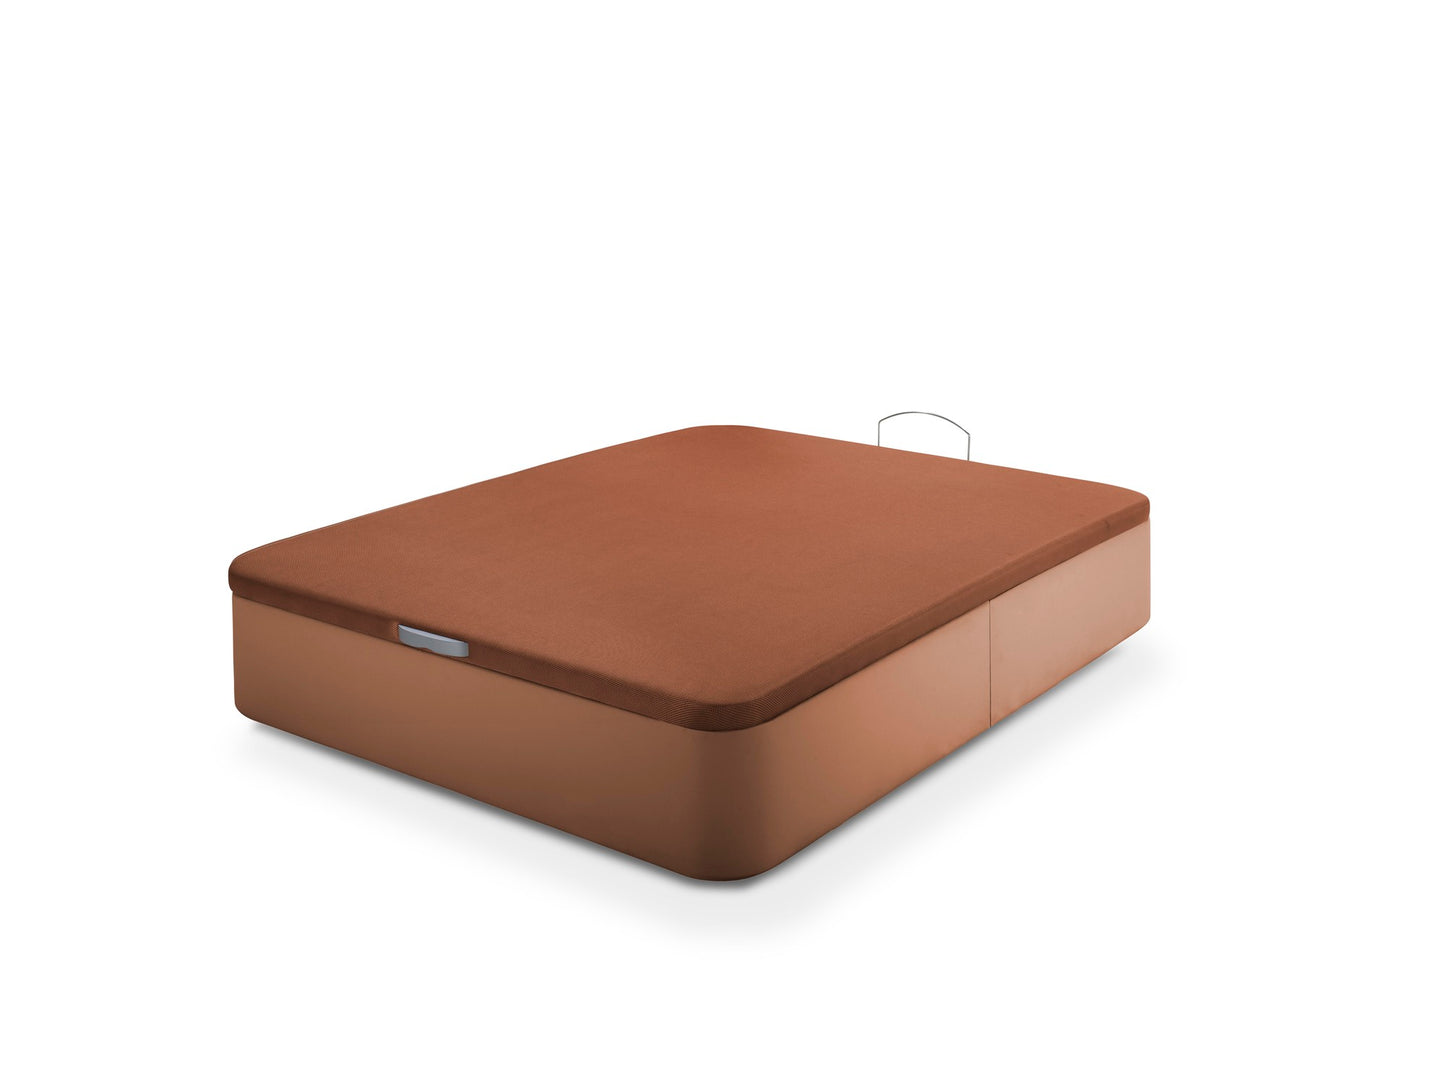 Pack Leatherette Canapé and Ergo-Relax Plus Mattress | BROWN